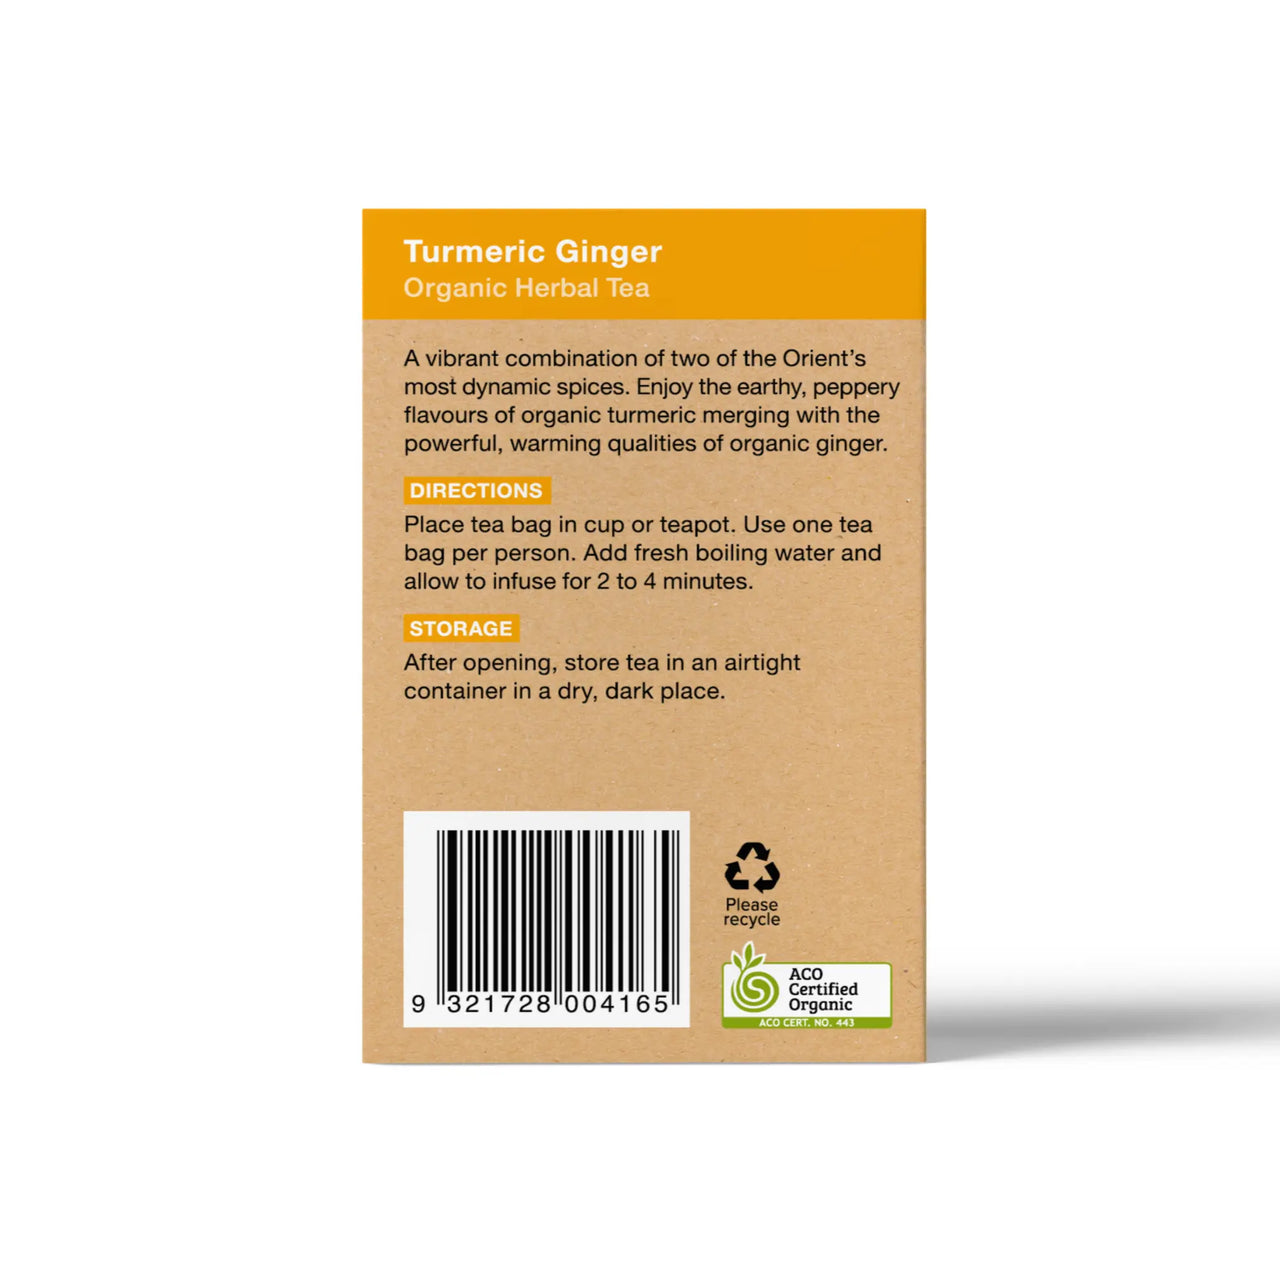 Turmeric and Ginger Teabags - Certified Organic